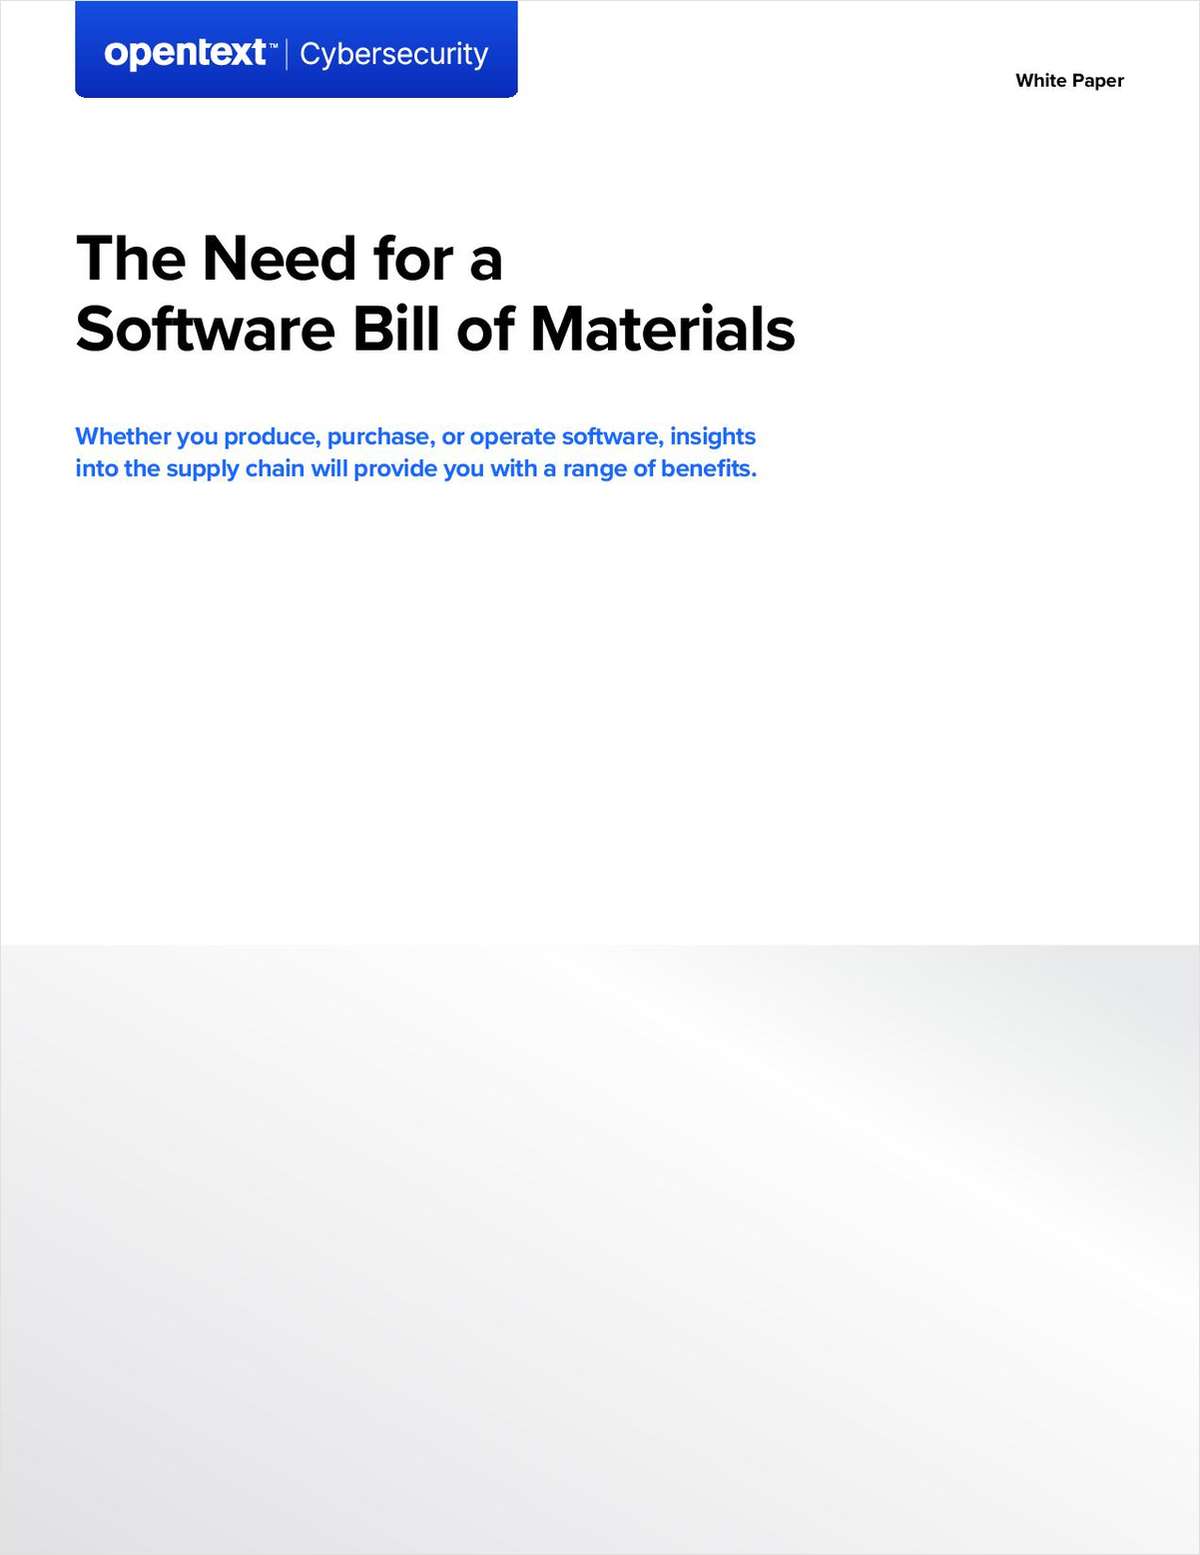 The Need for a Software Bill of Materials